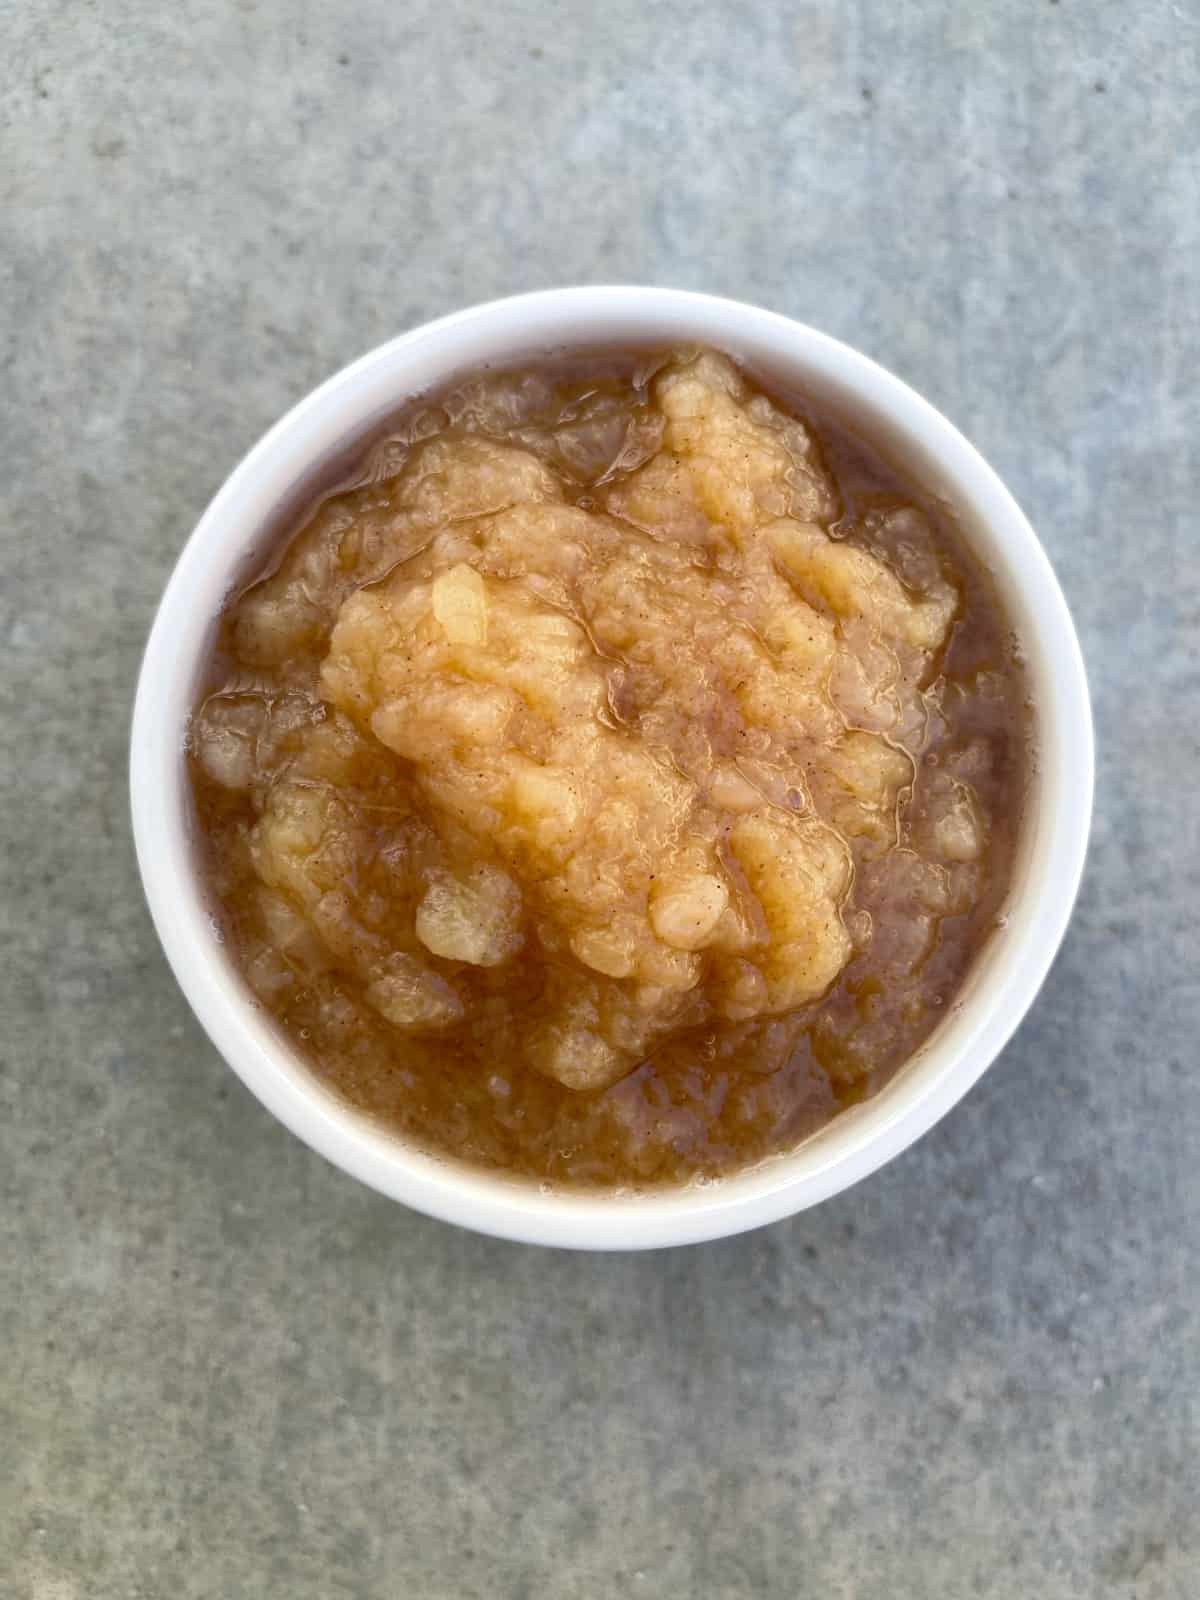 Instant Pot cinnamon applesauce in white bowl from above.